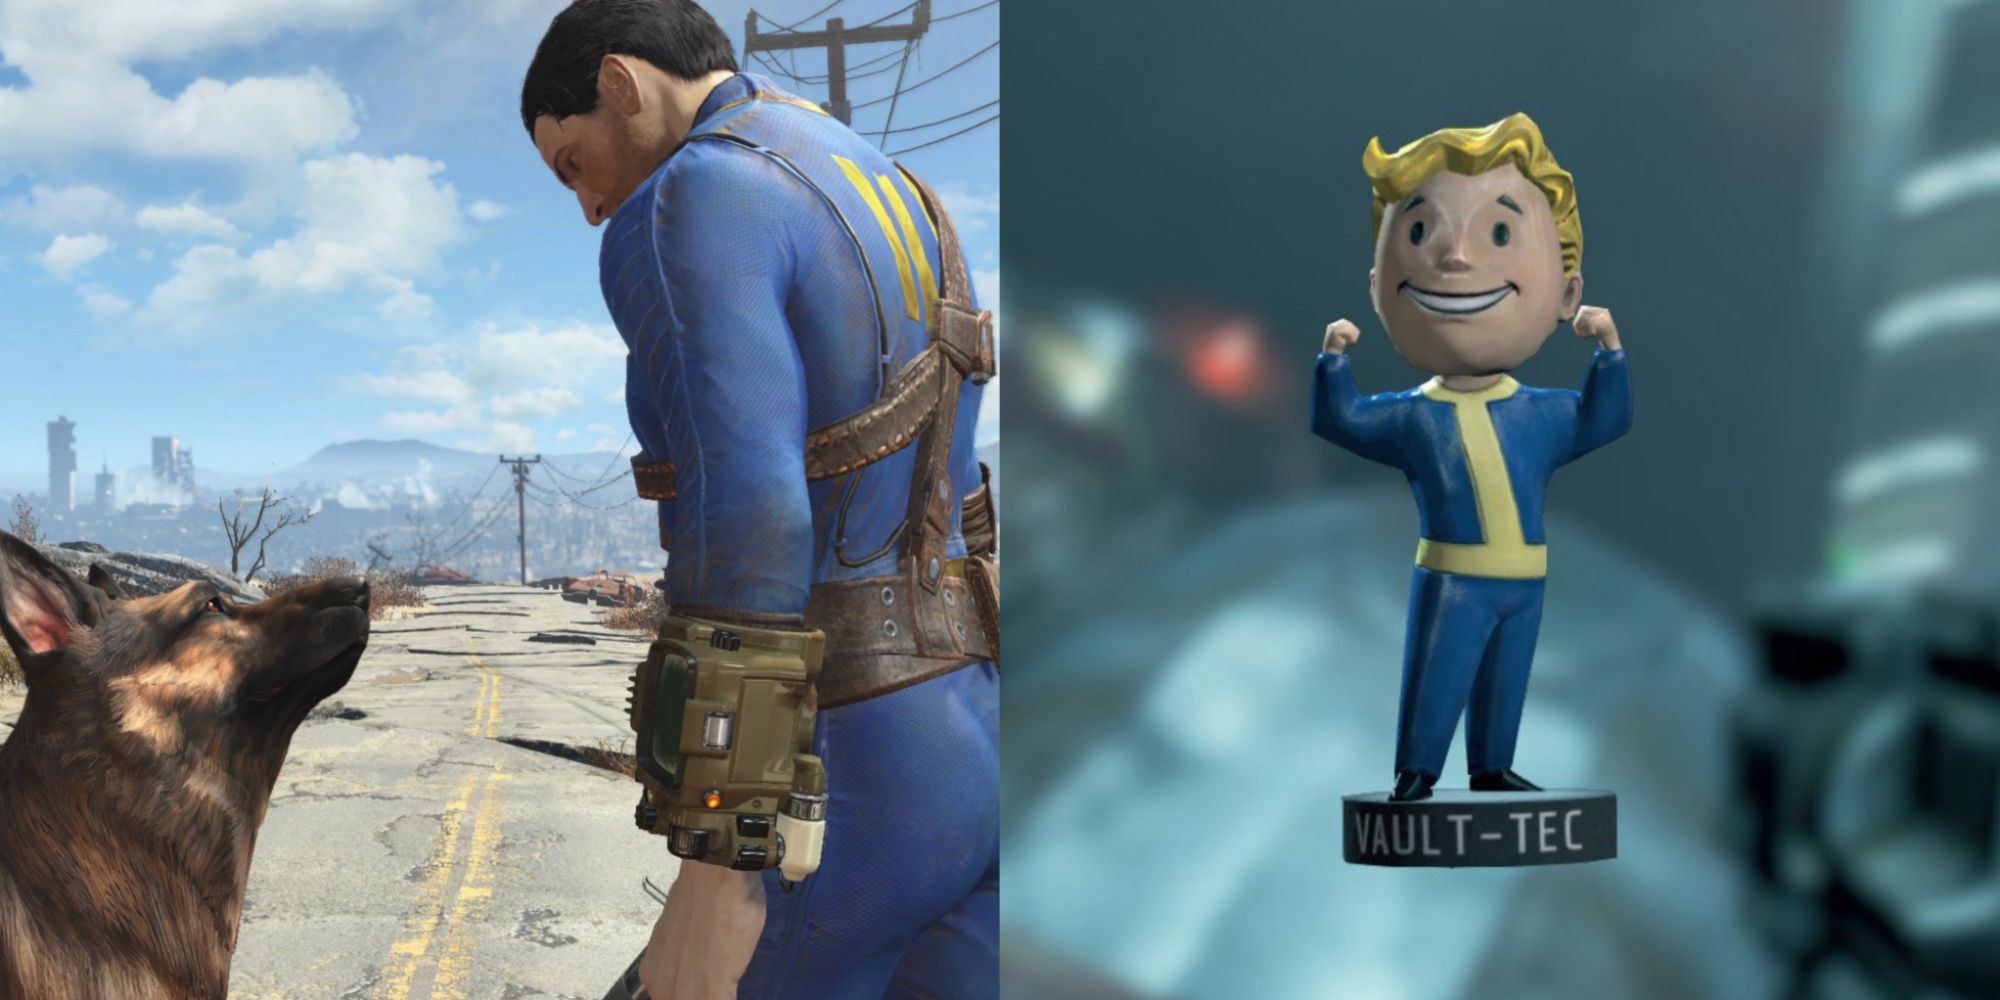 Fallout 4 Bobblehead Guide Featured Split Image Of Protagonist and dog next to Bobblehead